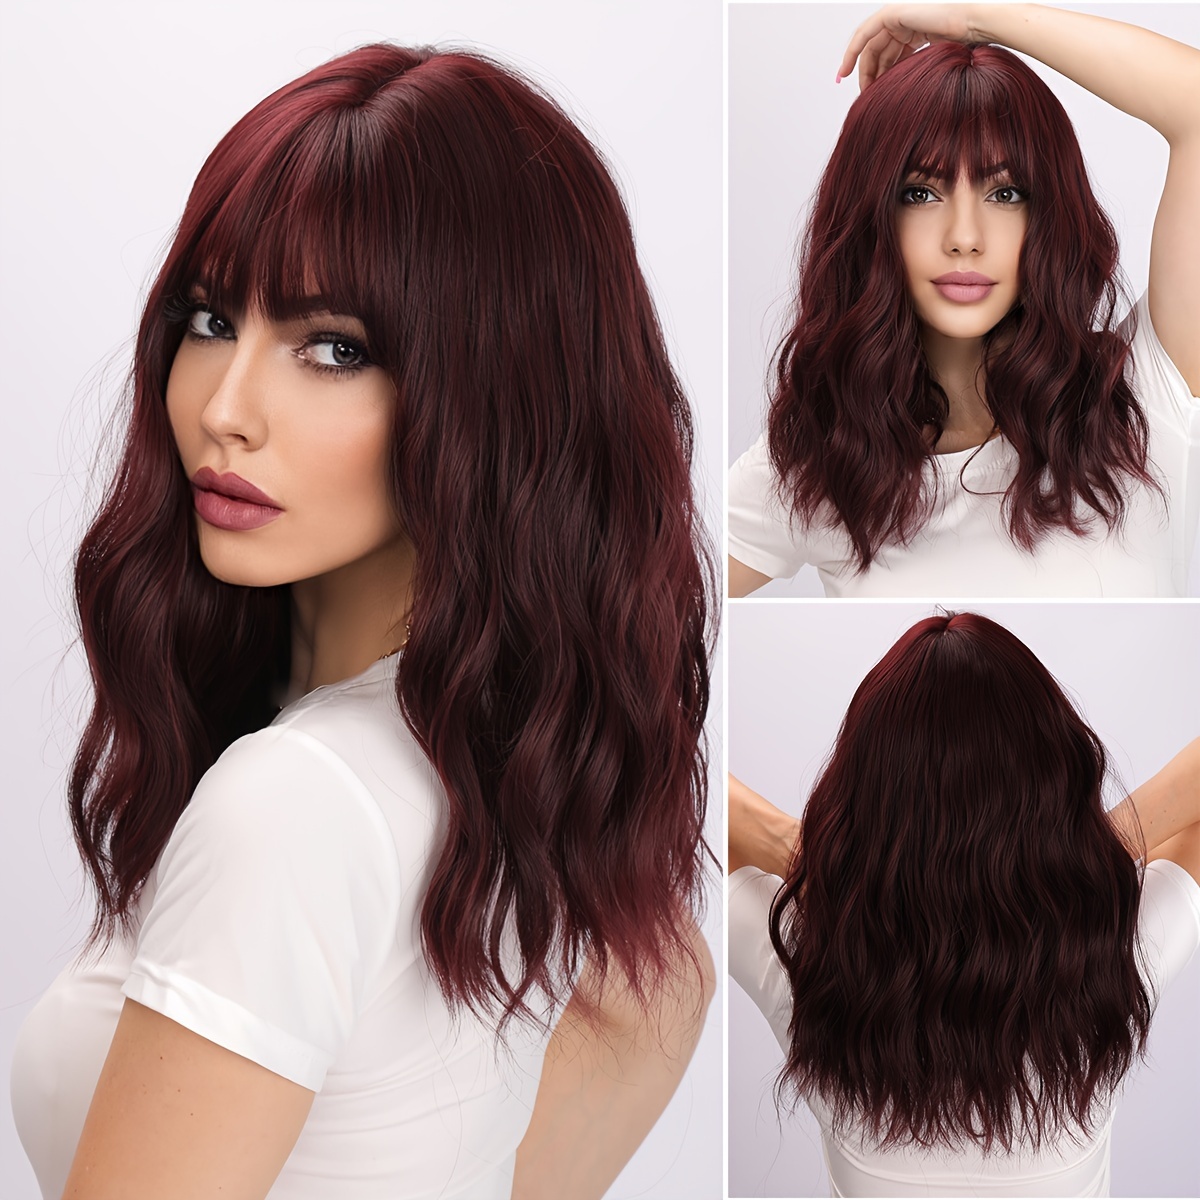 

14 Inch Women's Synthetic Wig - Red Curly Wig, Heat-resistant Wig - Ideal Choice For Halloween Parties And Costume Role-playing